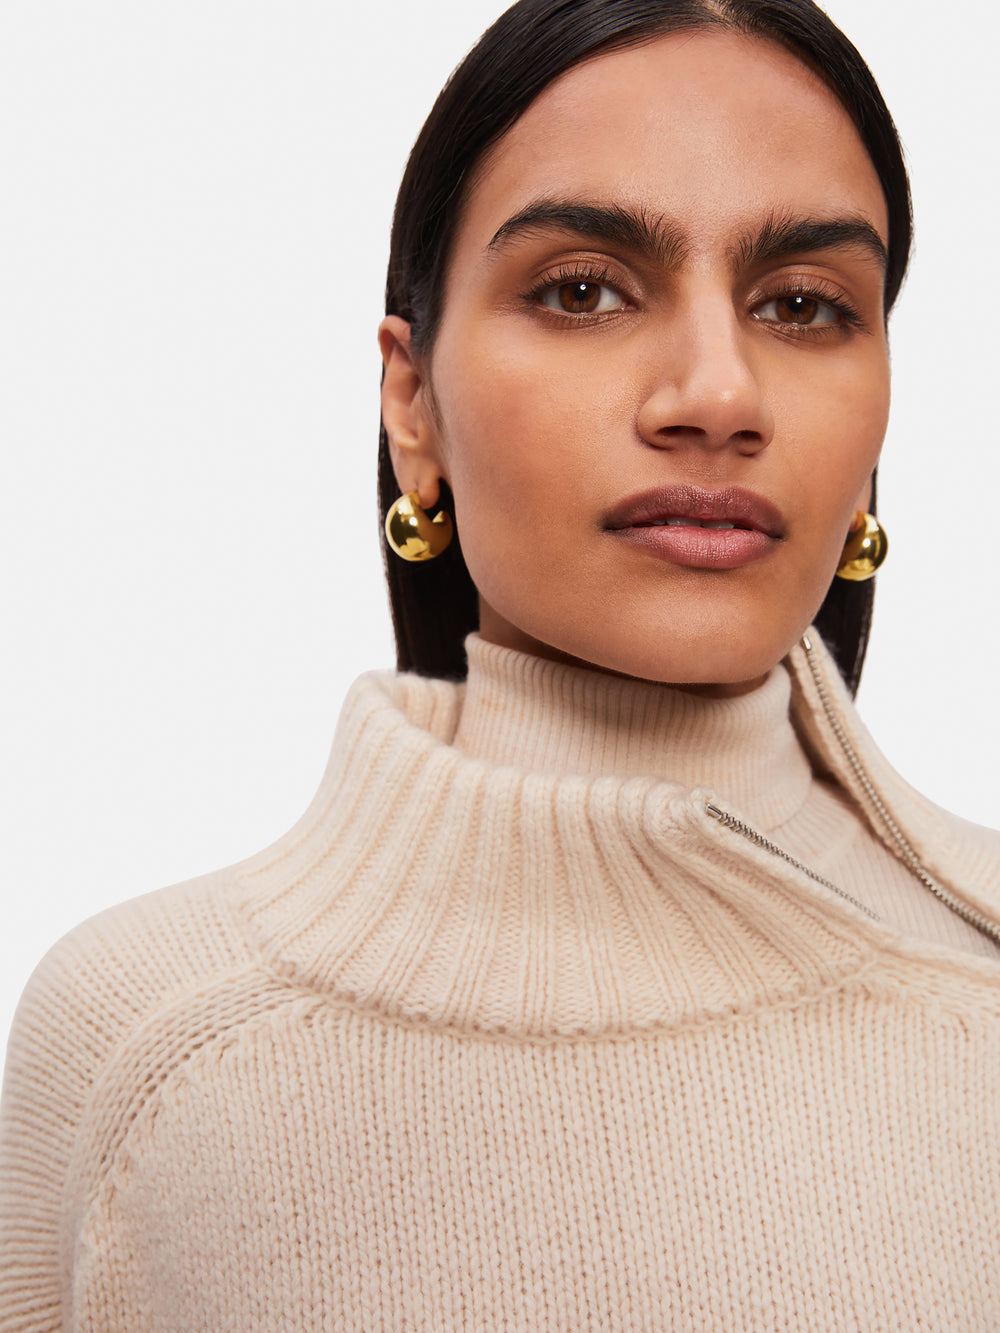 Jigsaw 24ct gold plate these sculptural dome earrings will be your jewellery box favourite this season. Lift any daytime casual look or add as the finishing touch to your evening ensemble, these earrings go with everything.